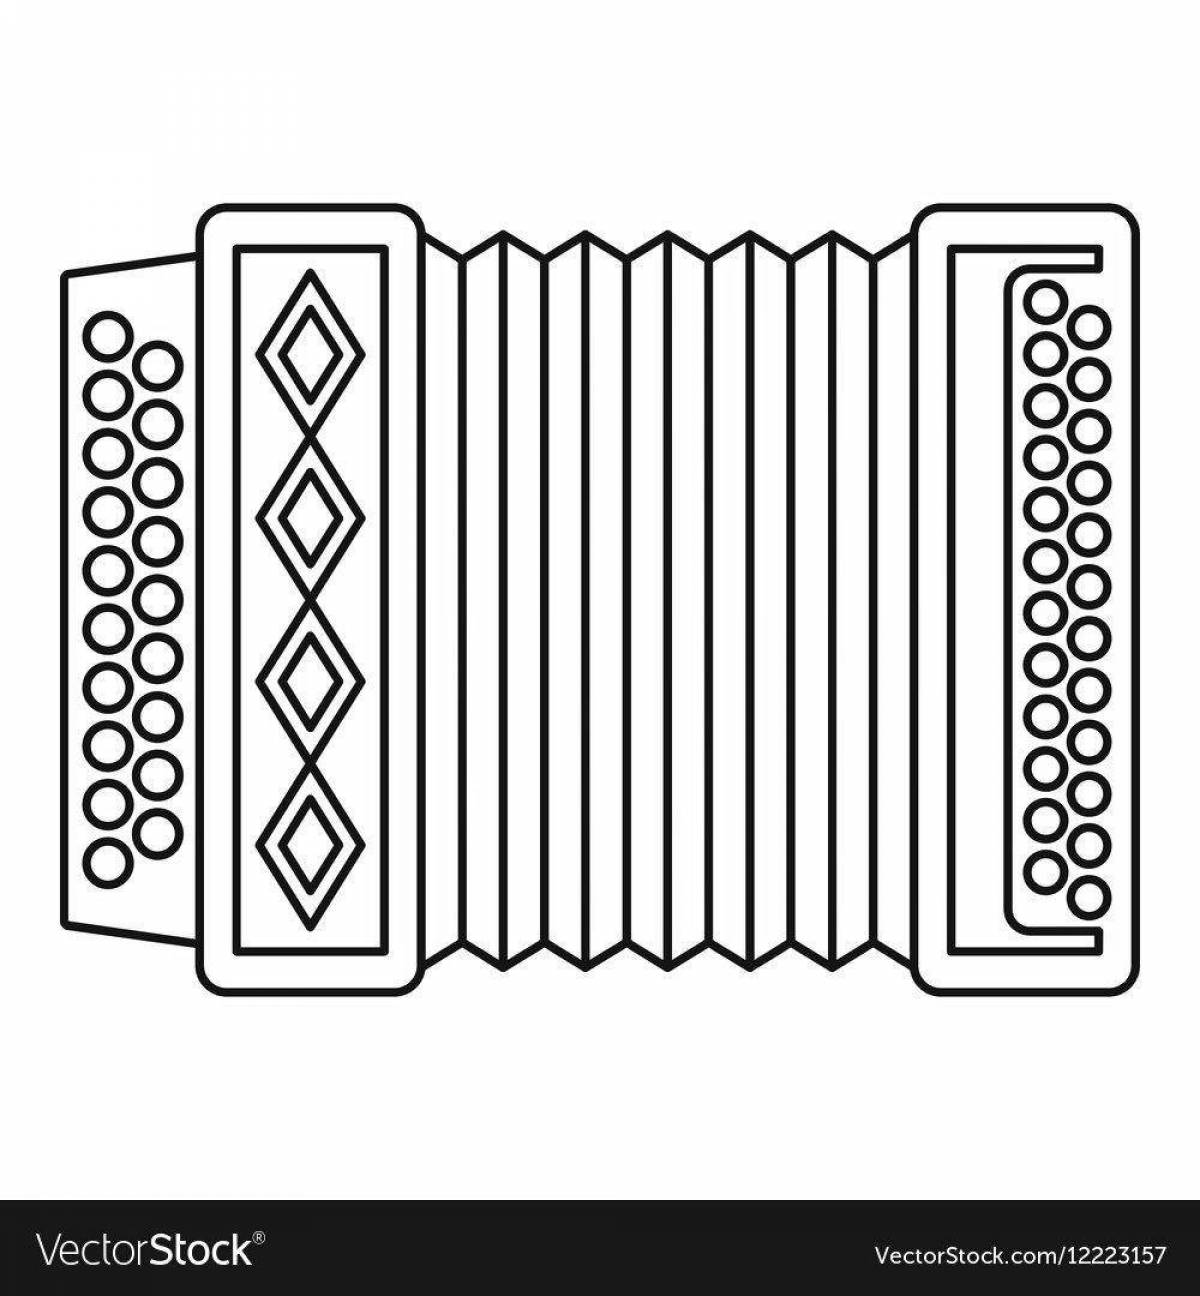 Adorable harmonica coloring book for beginners